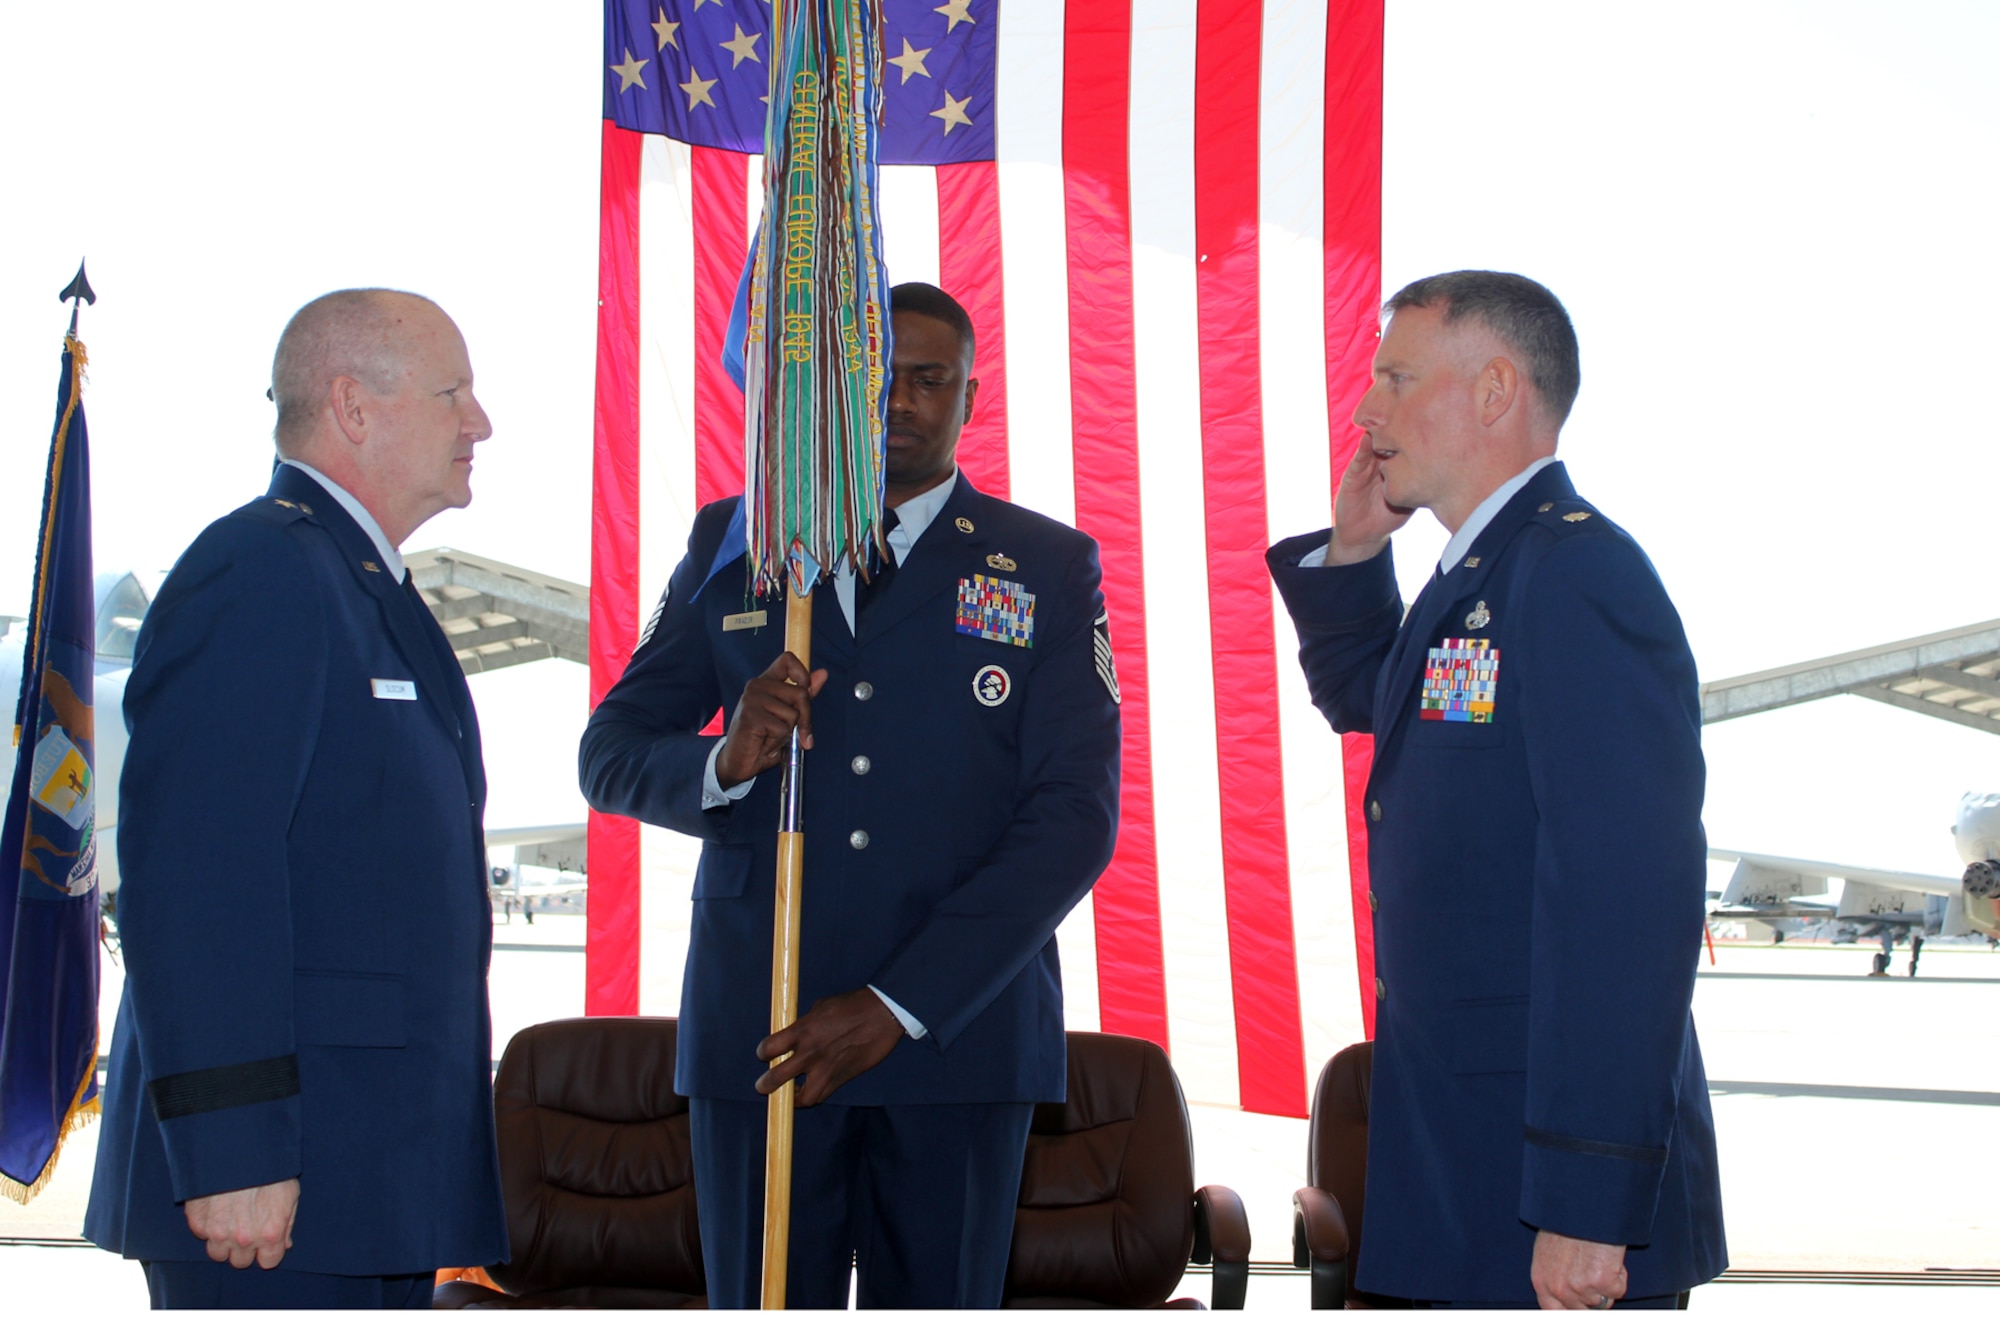 Lt. Col. David Spehar salutes Brig. Gen. John D. Slocum during a change of command ceremony for the 127th Maintenance Group at Selfridge Air National Guard Base, Mich., April 16, 2017. Slocum is the commander of the 127th Wing. Spehar assumed command of the Group, replaces Col. Rolf E. Mammen, who now serves as the 127th Wing vice commander. Holding the 127th MXG guidon is Master Sgt. Akenty Frazer, the first sergeant of the Group. The Group maintains the A-10 Thunderbolt II aircraft at Selfridge. (U.S. Air National Guard photos by Tech. Sgt. Dan Heaton)